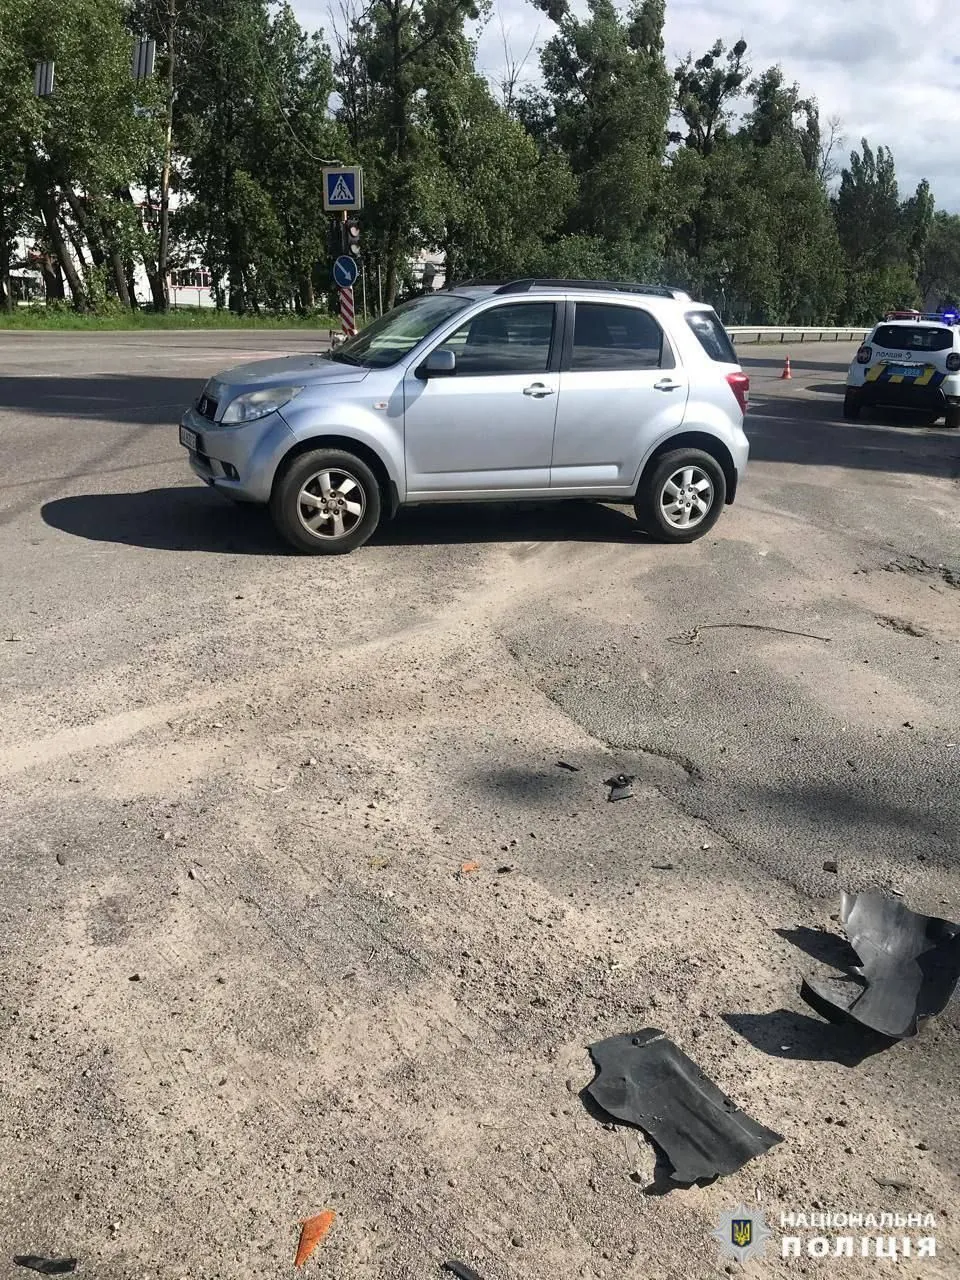 a-one-year-old-child-was-injured-in-an-accident-in-kyiv-region